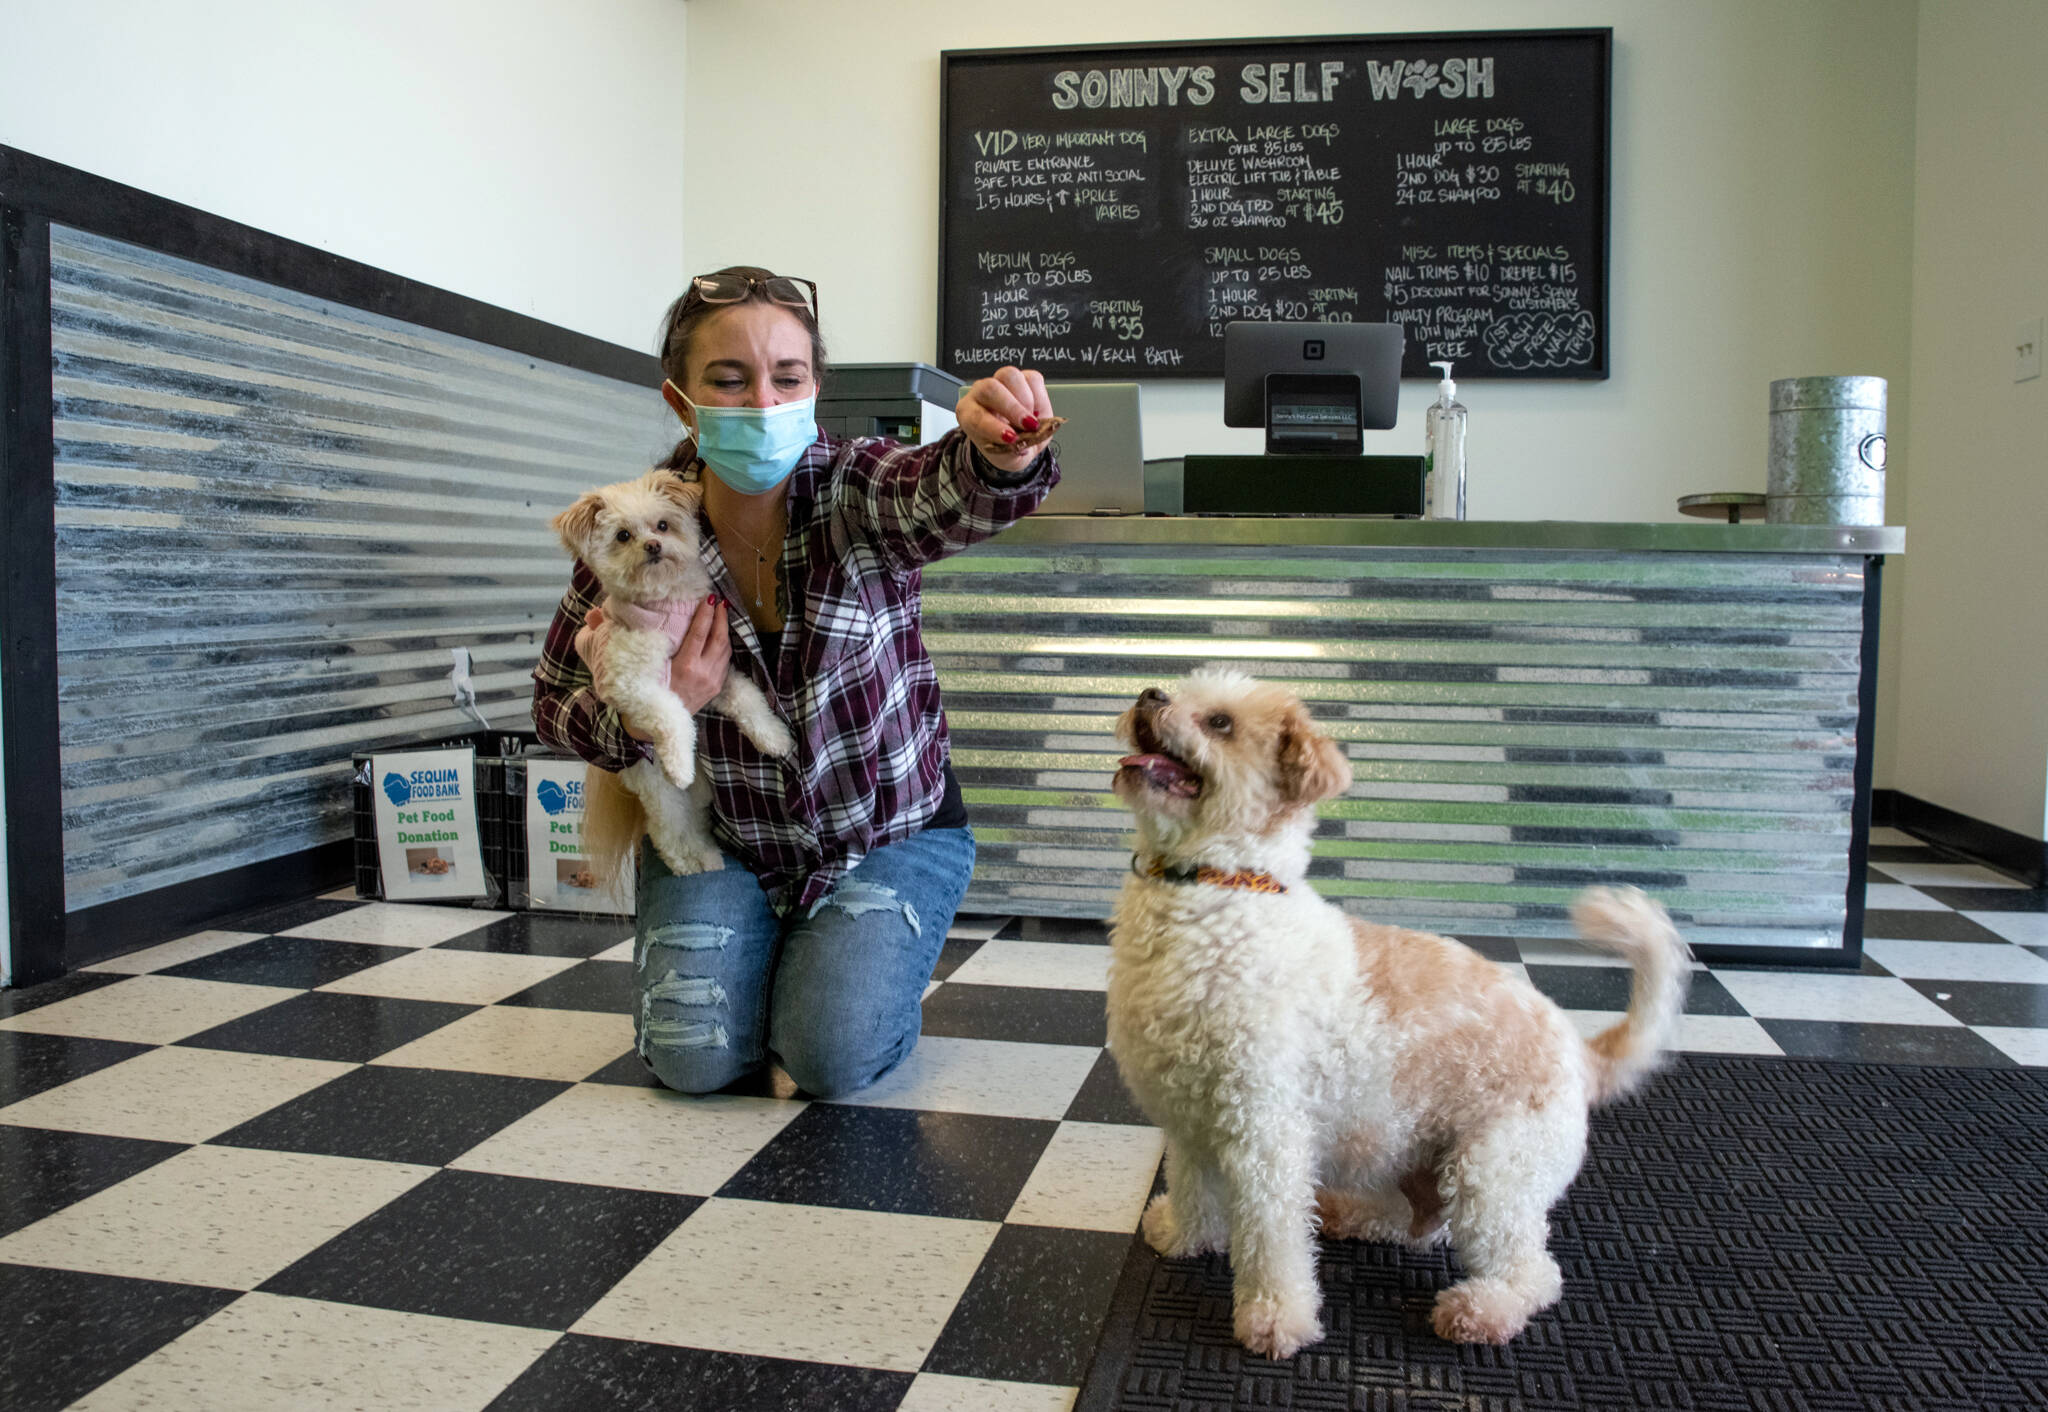 Mary Kniskern, owner of Sonny’s Self Wash, plays with her dogs Sonny, in front, and Piper, in her arms. Behind Kniskern are boxes for people to drop off pet food for the Sequim Food Bank. (Emily Matthiessen/Olympic Peninsula News Group)